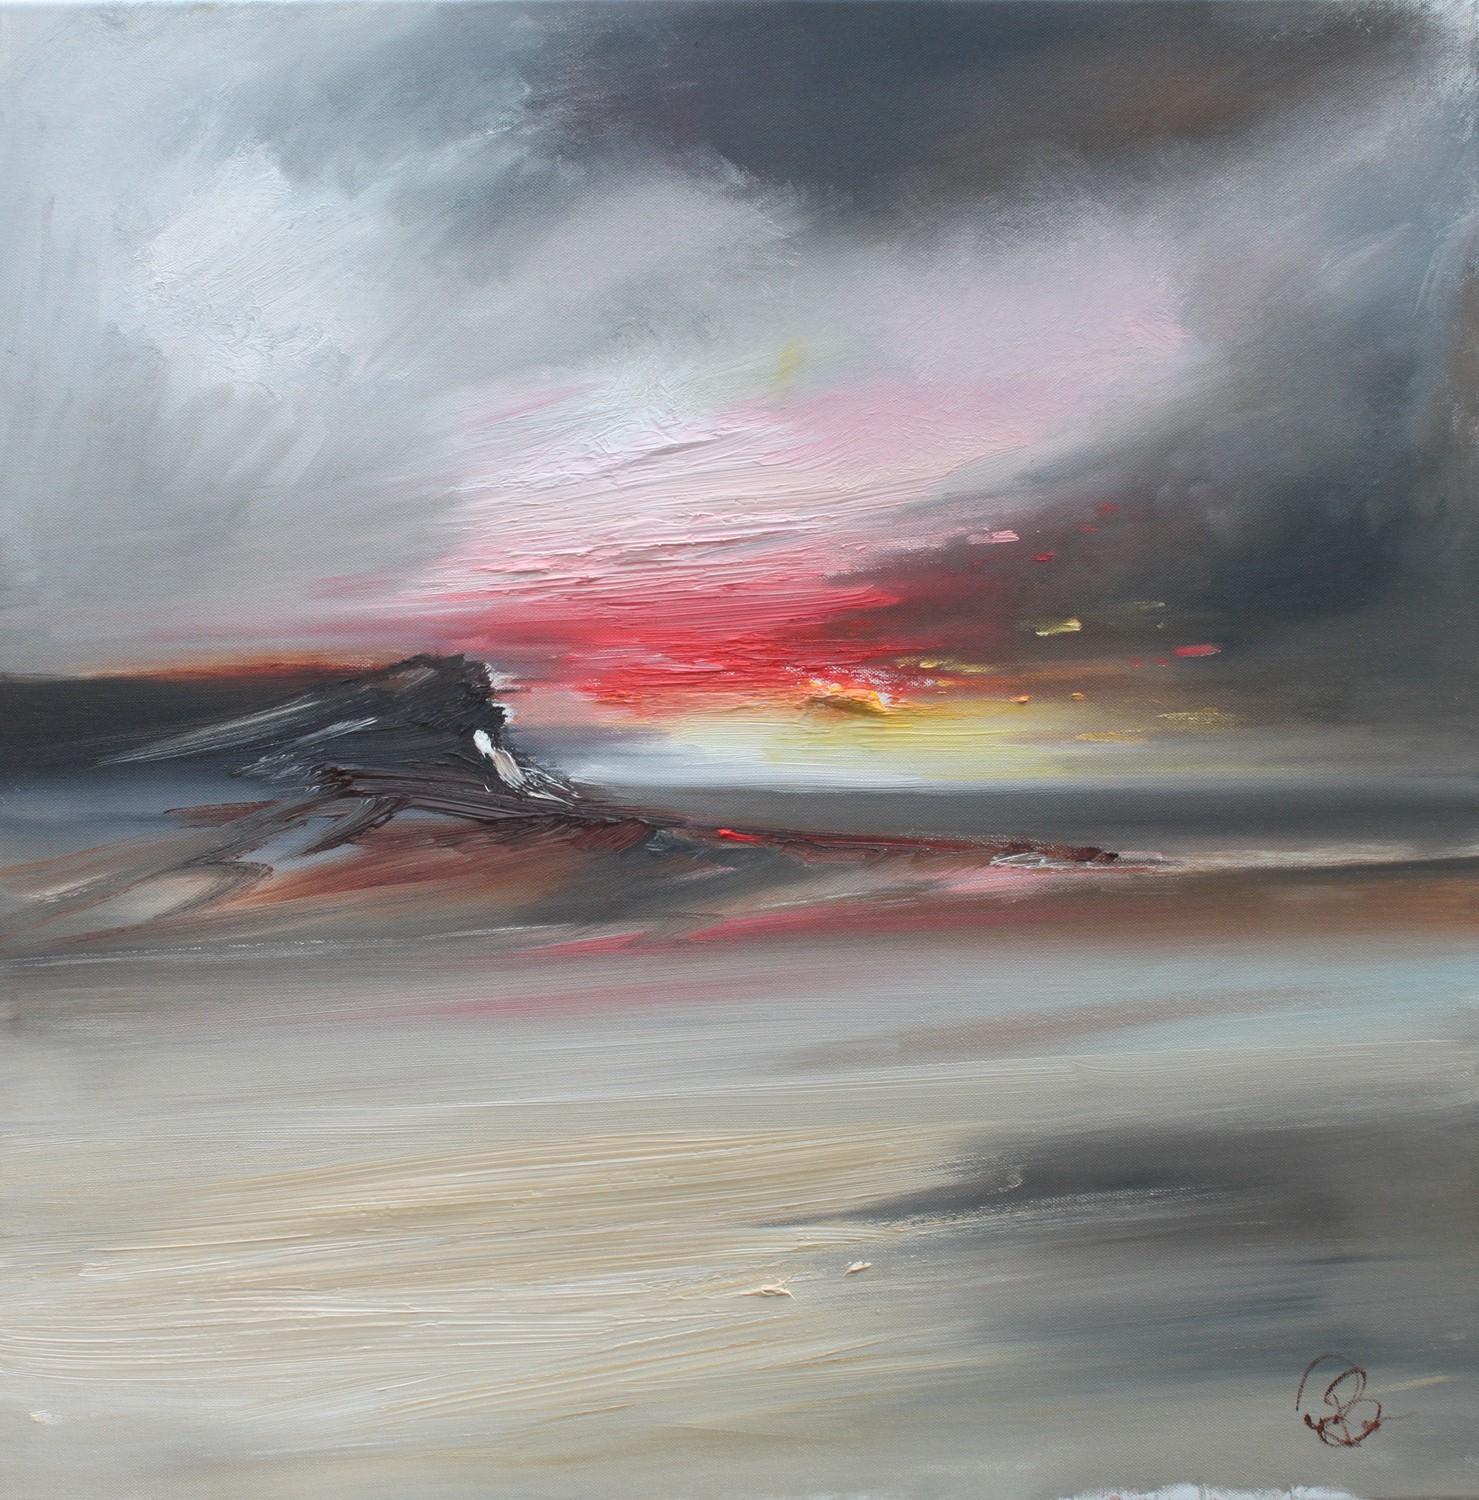 'Sunset to remember' by artist Rosanne Barr